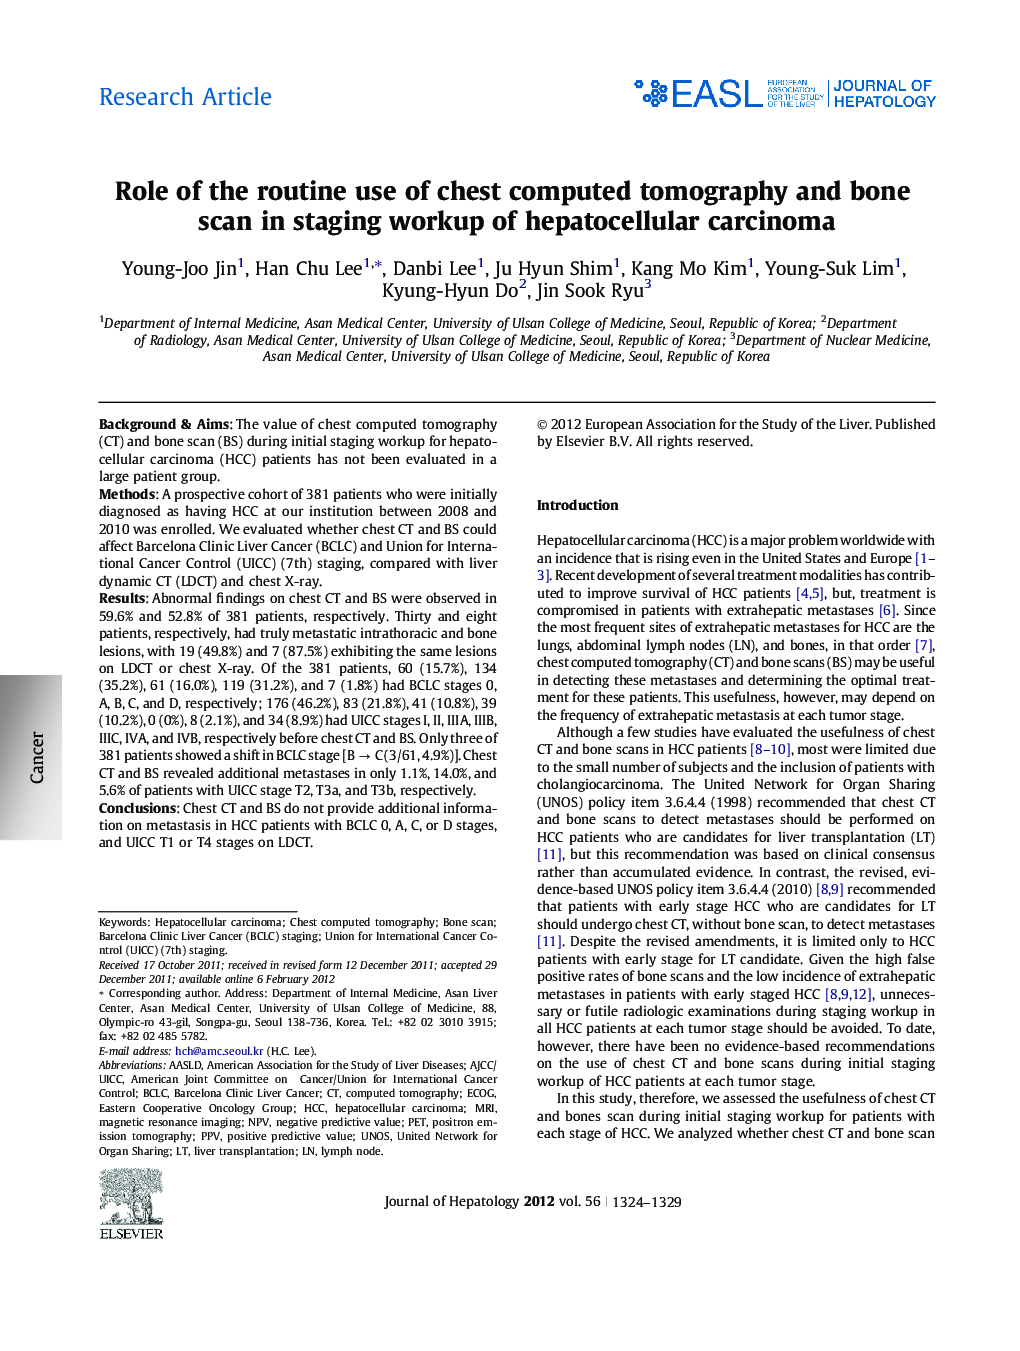 Research ArticleRole of the routine use of chest computed tomography and bone scan in staging workup of hepatocellular carcinoma